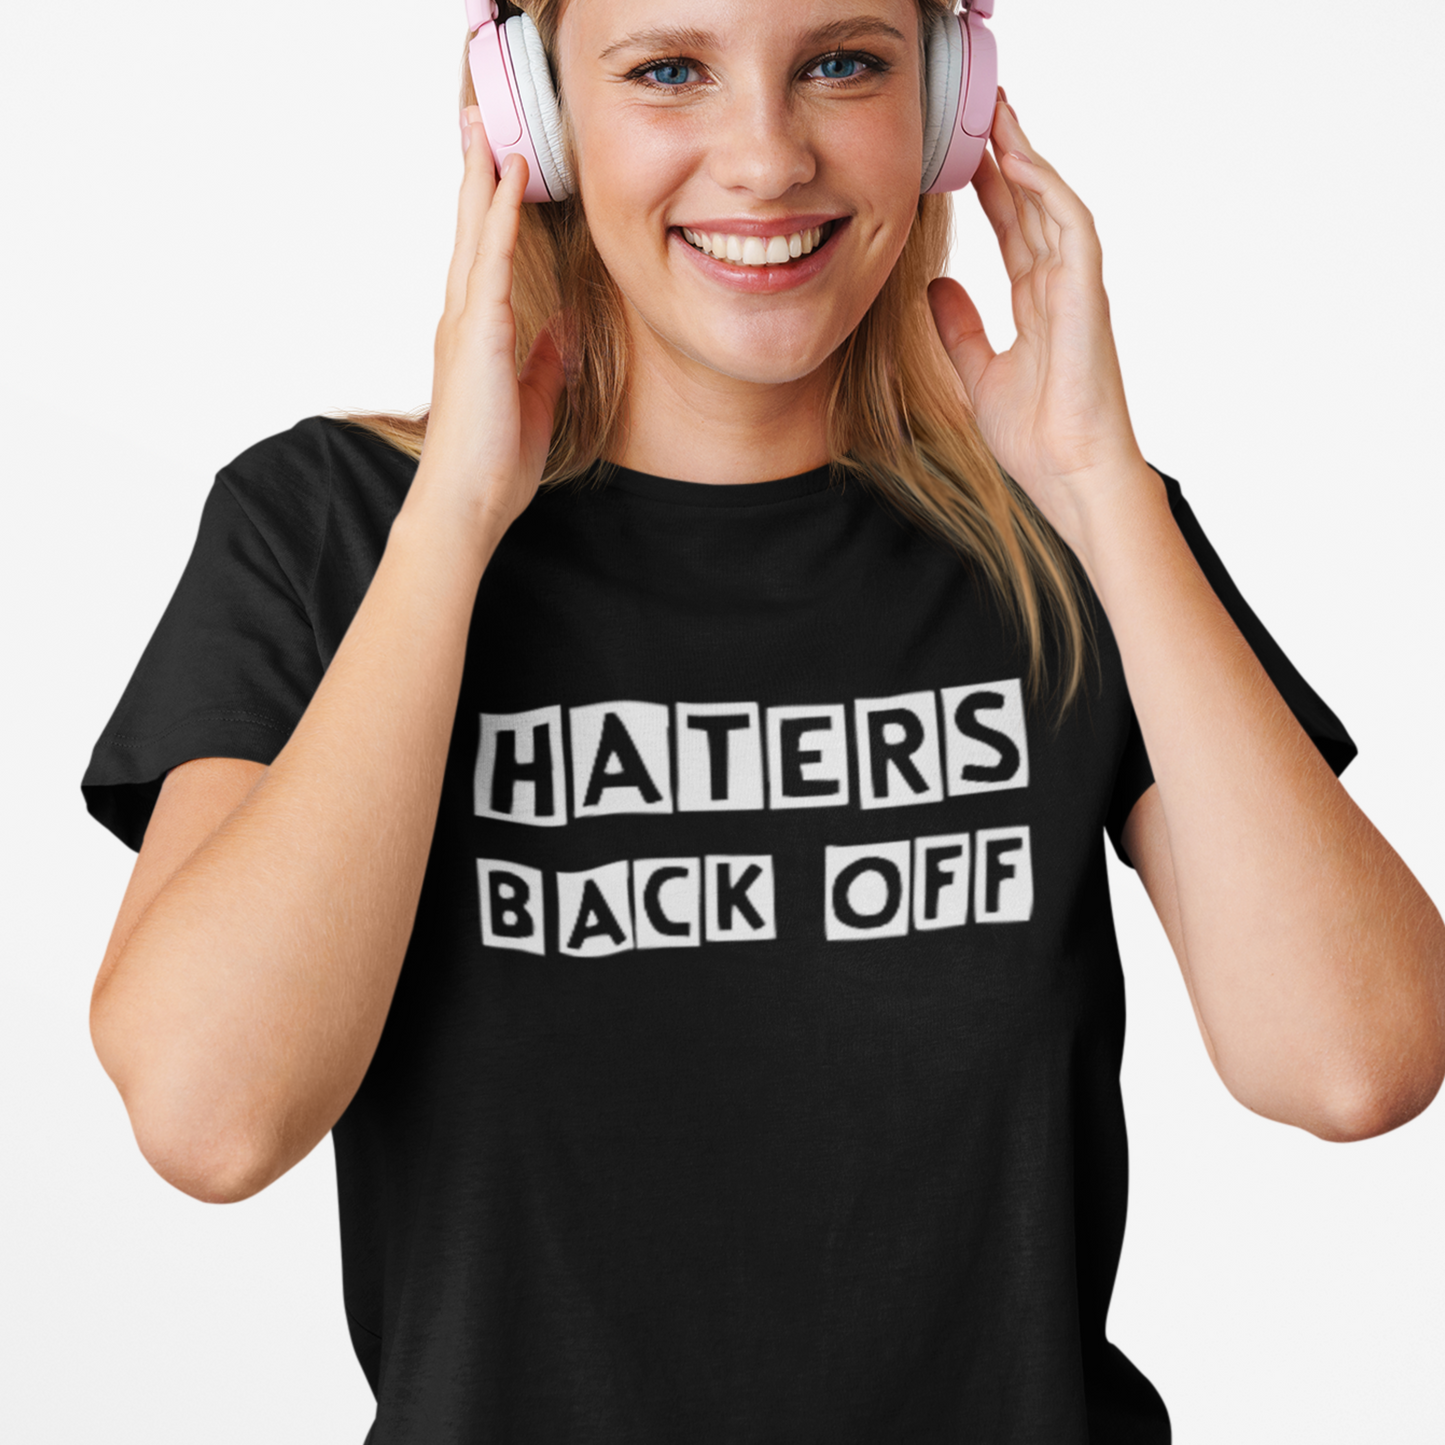 Haters Back Off Unisex T Shirt, Funny Quote Shirt, Shirts With Sayings, Funny T-Shirt, Funny Tees, Sarcastic Shirt